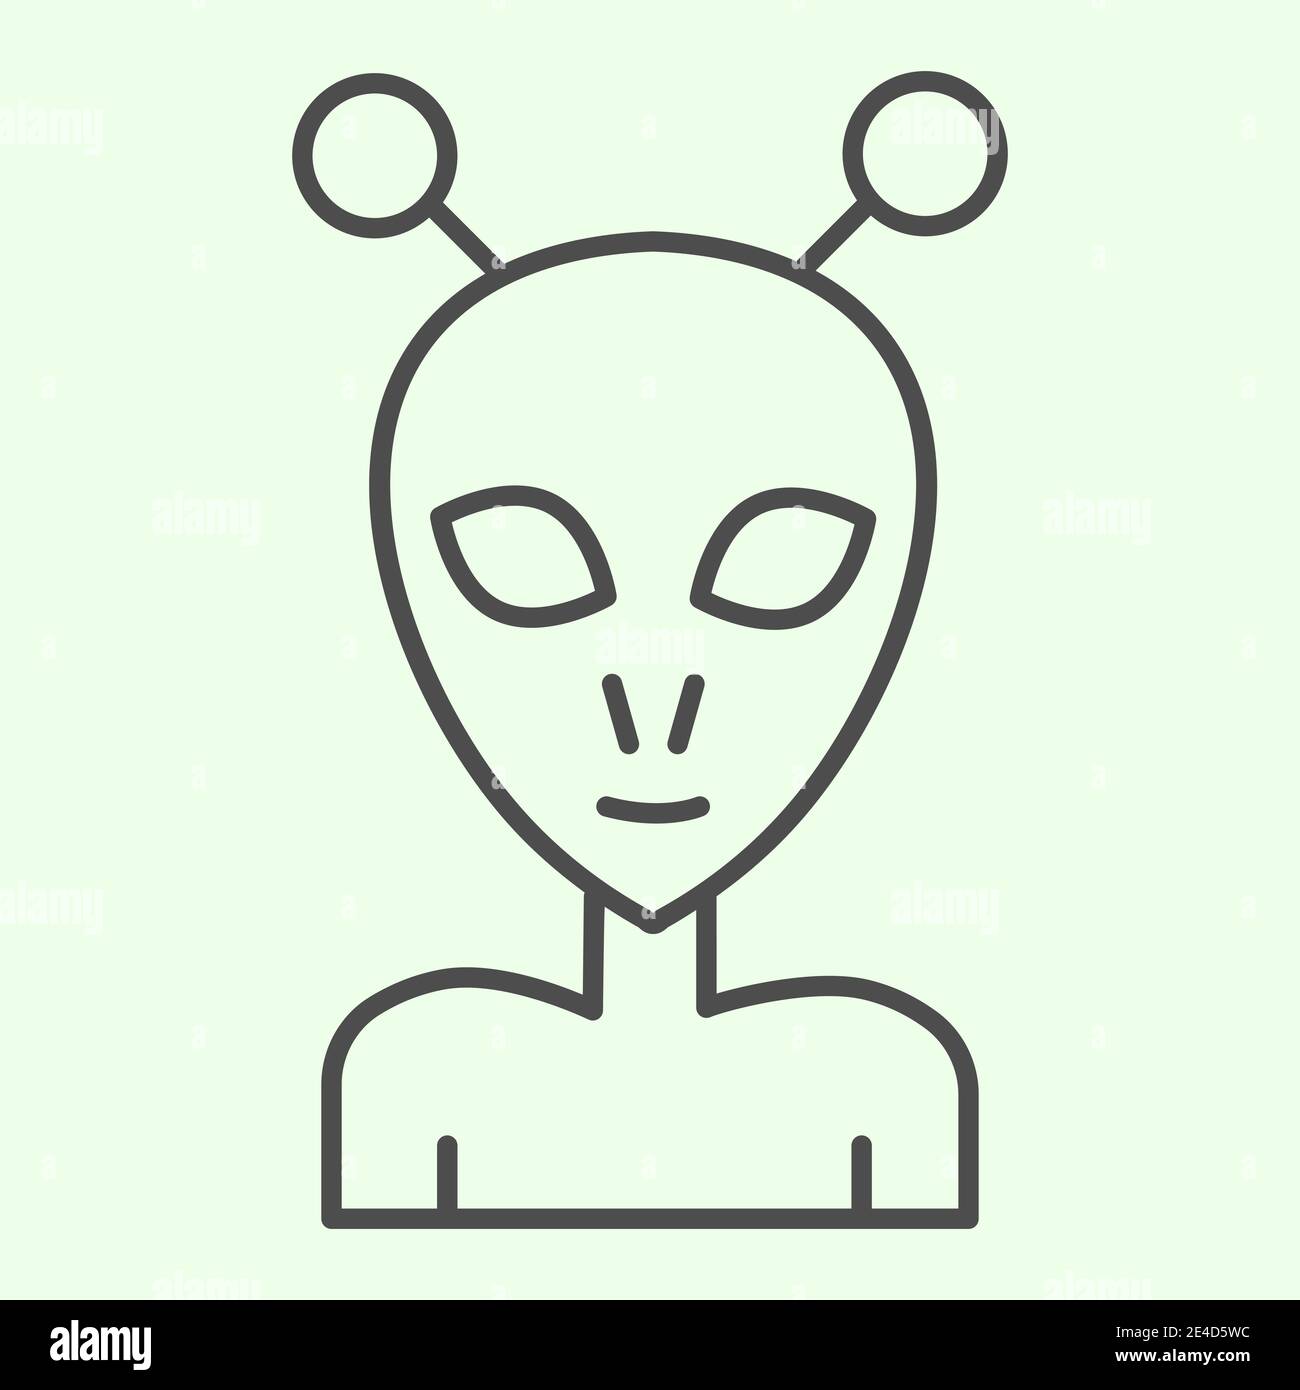 Alien thin line icon. Extraterrestrial foreigner with oval face and large eyes outline style pictogram on white background. Exploration signs for Stock Vector